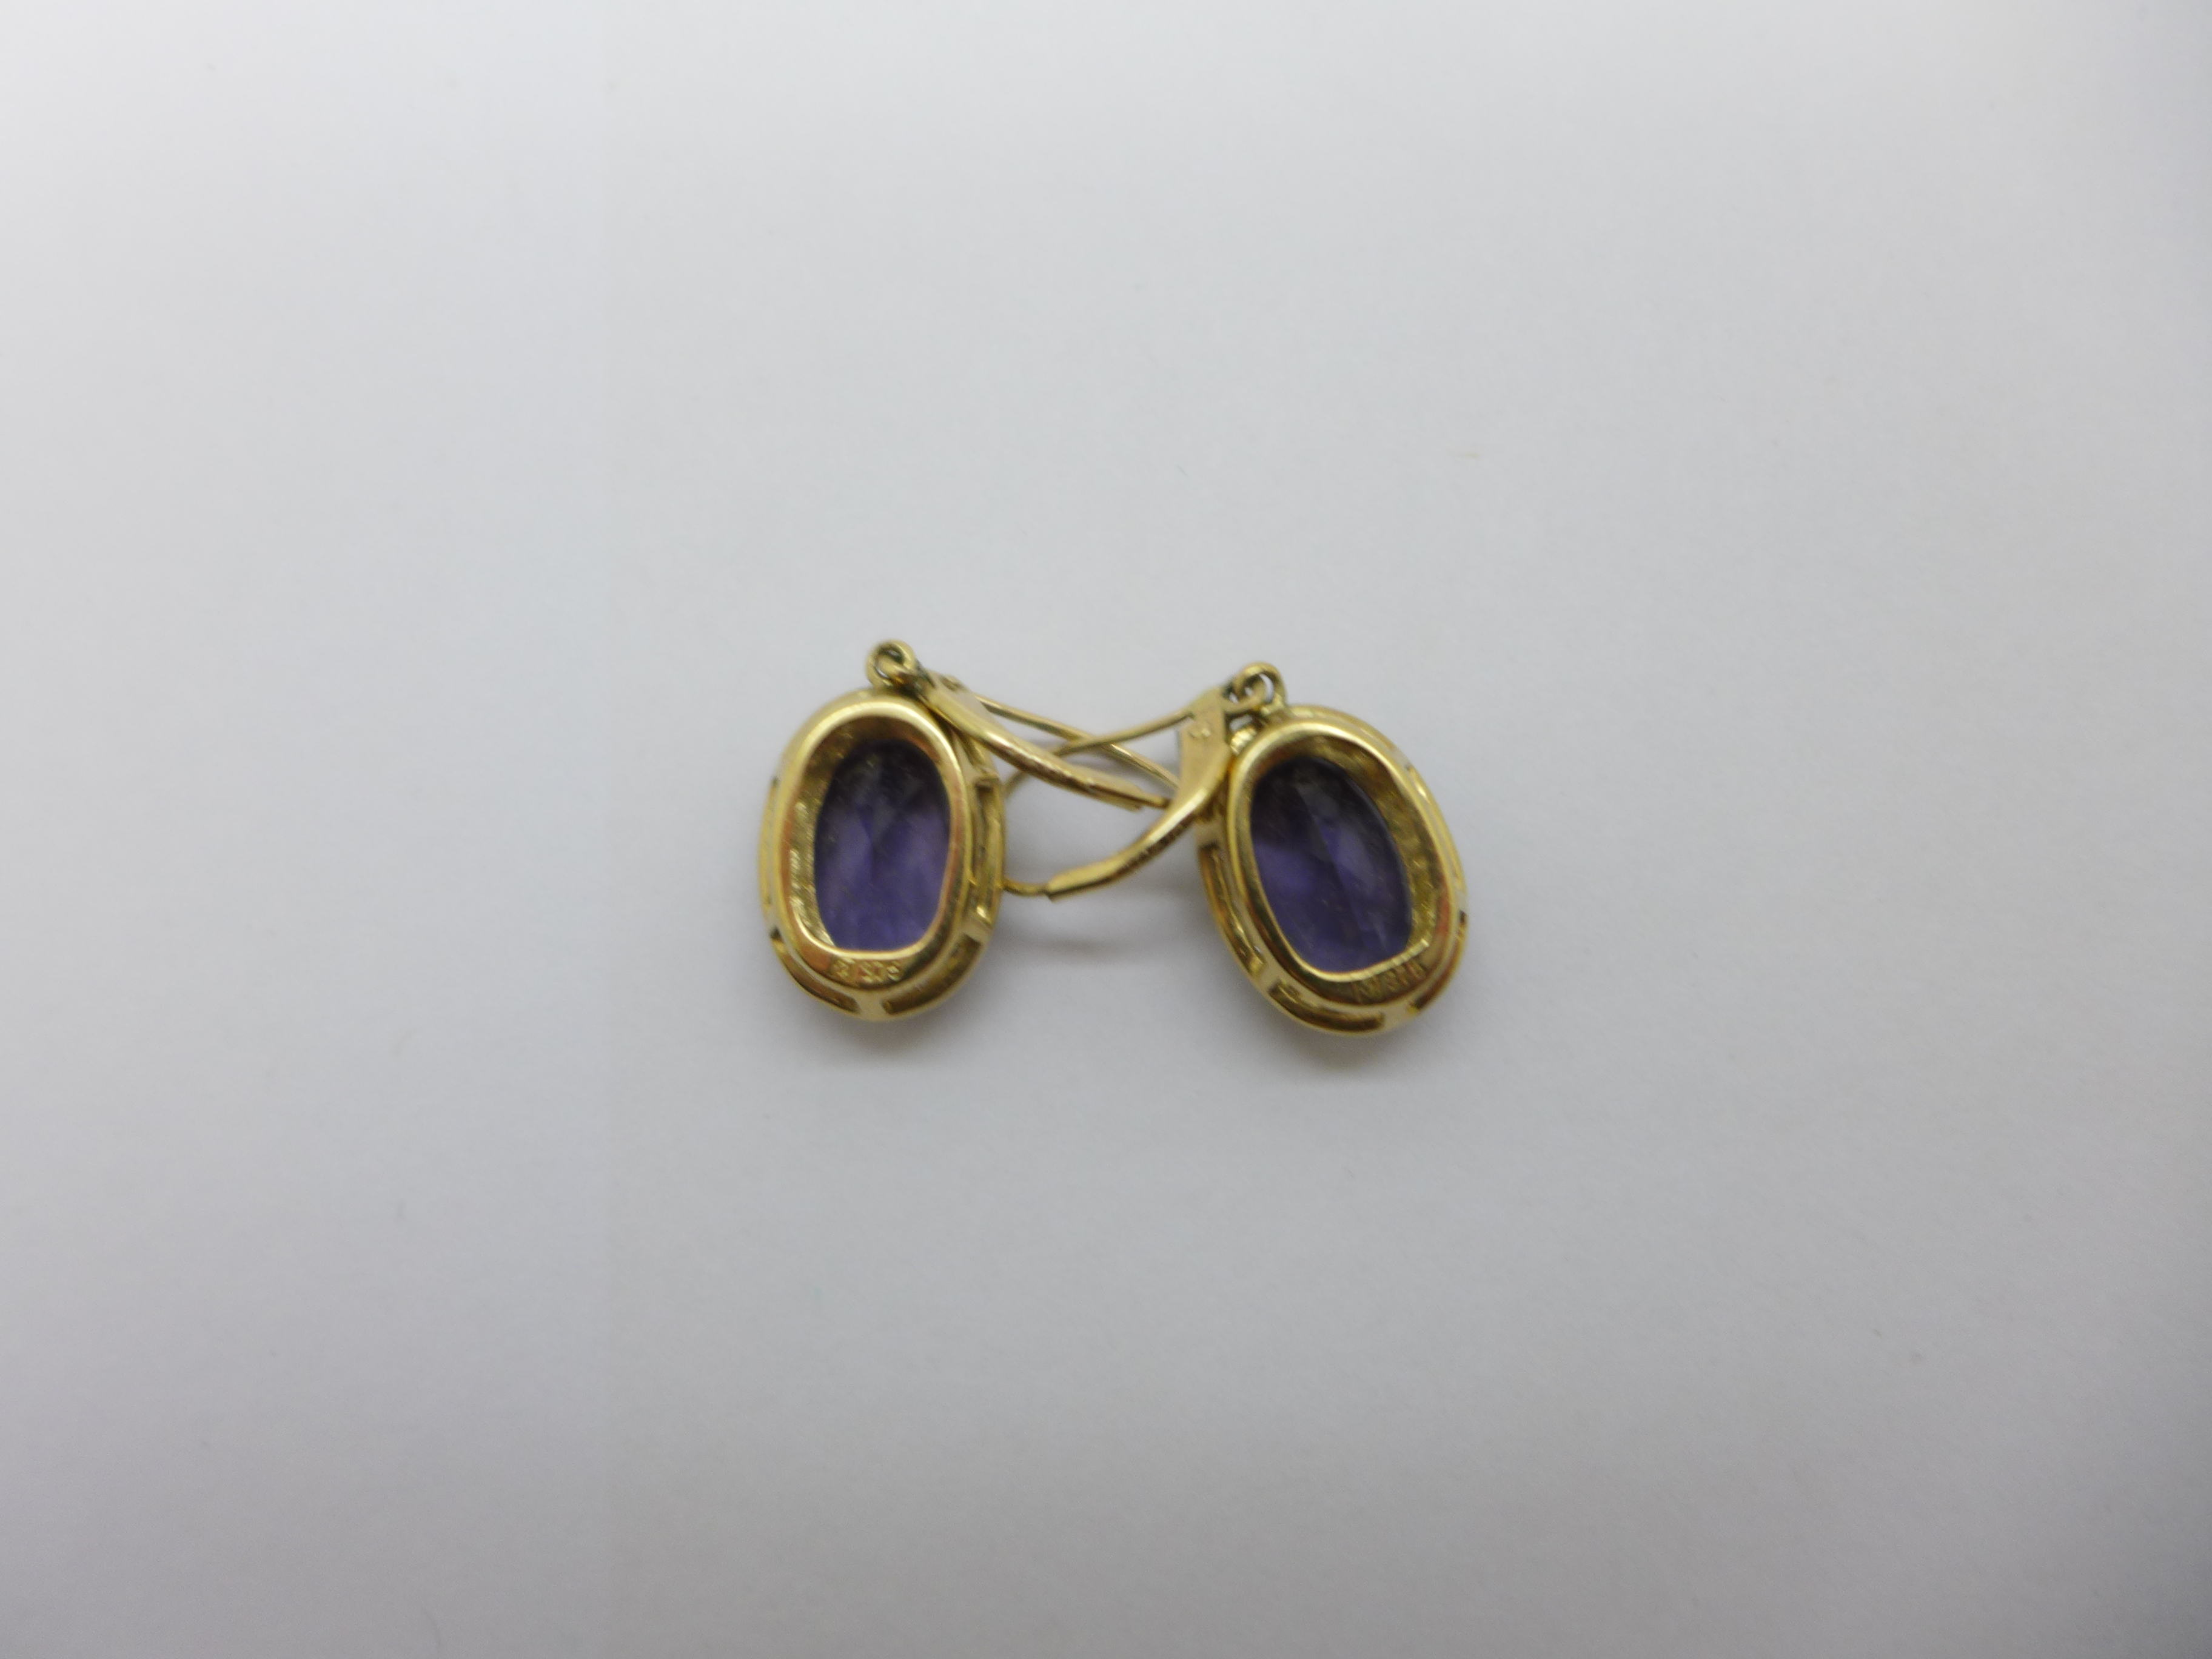 A pair of 9ct gold, amethyst and diamond pendant earrings, 4.1g, amethysts approximately 8mm x 11mm - Image 3 of 3